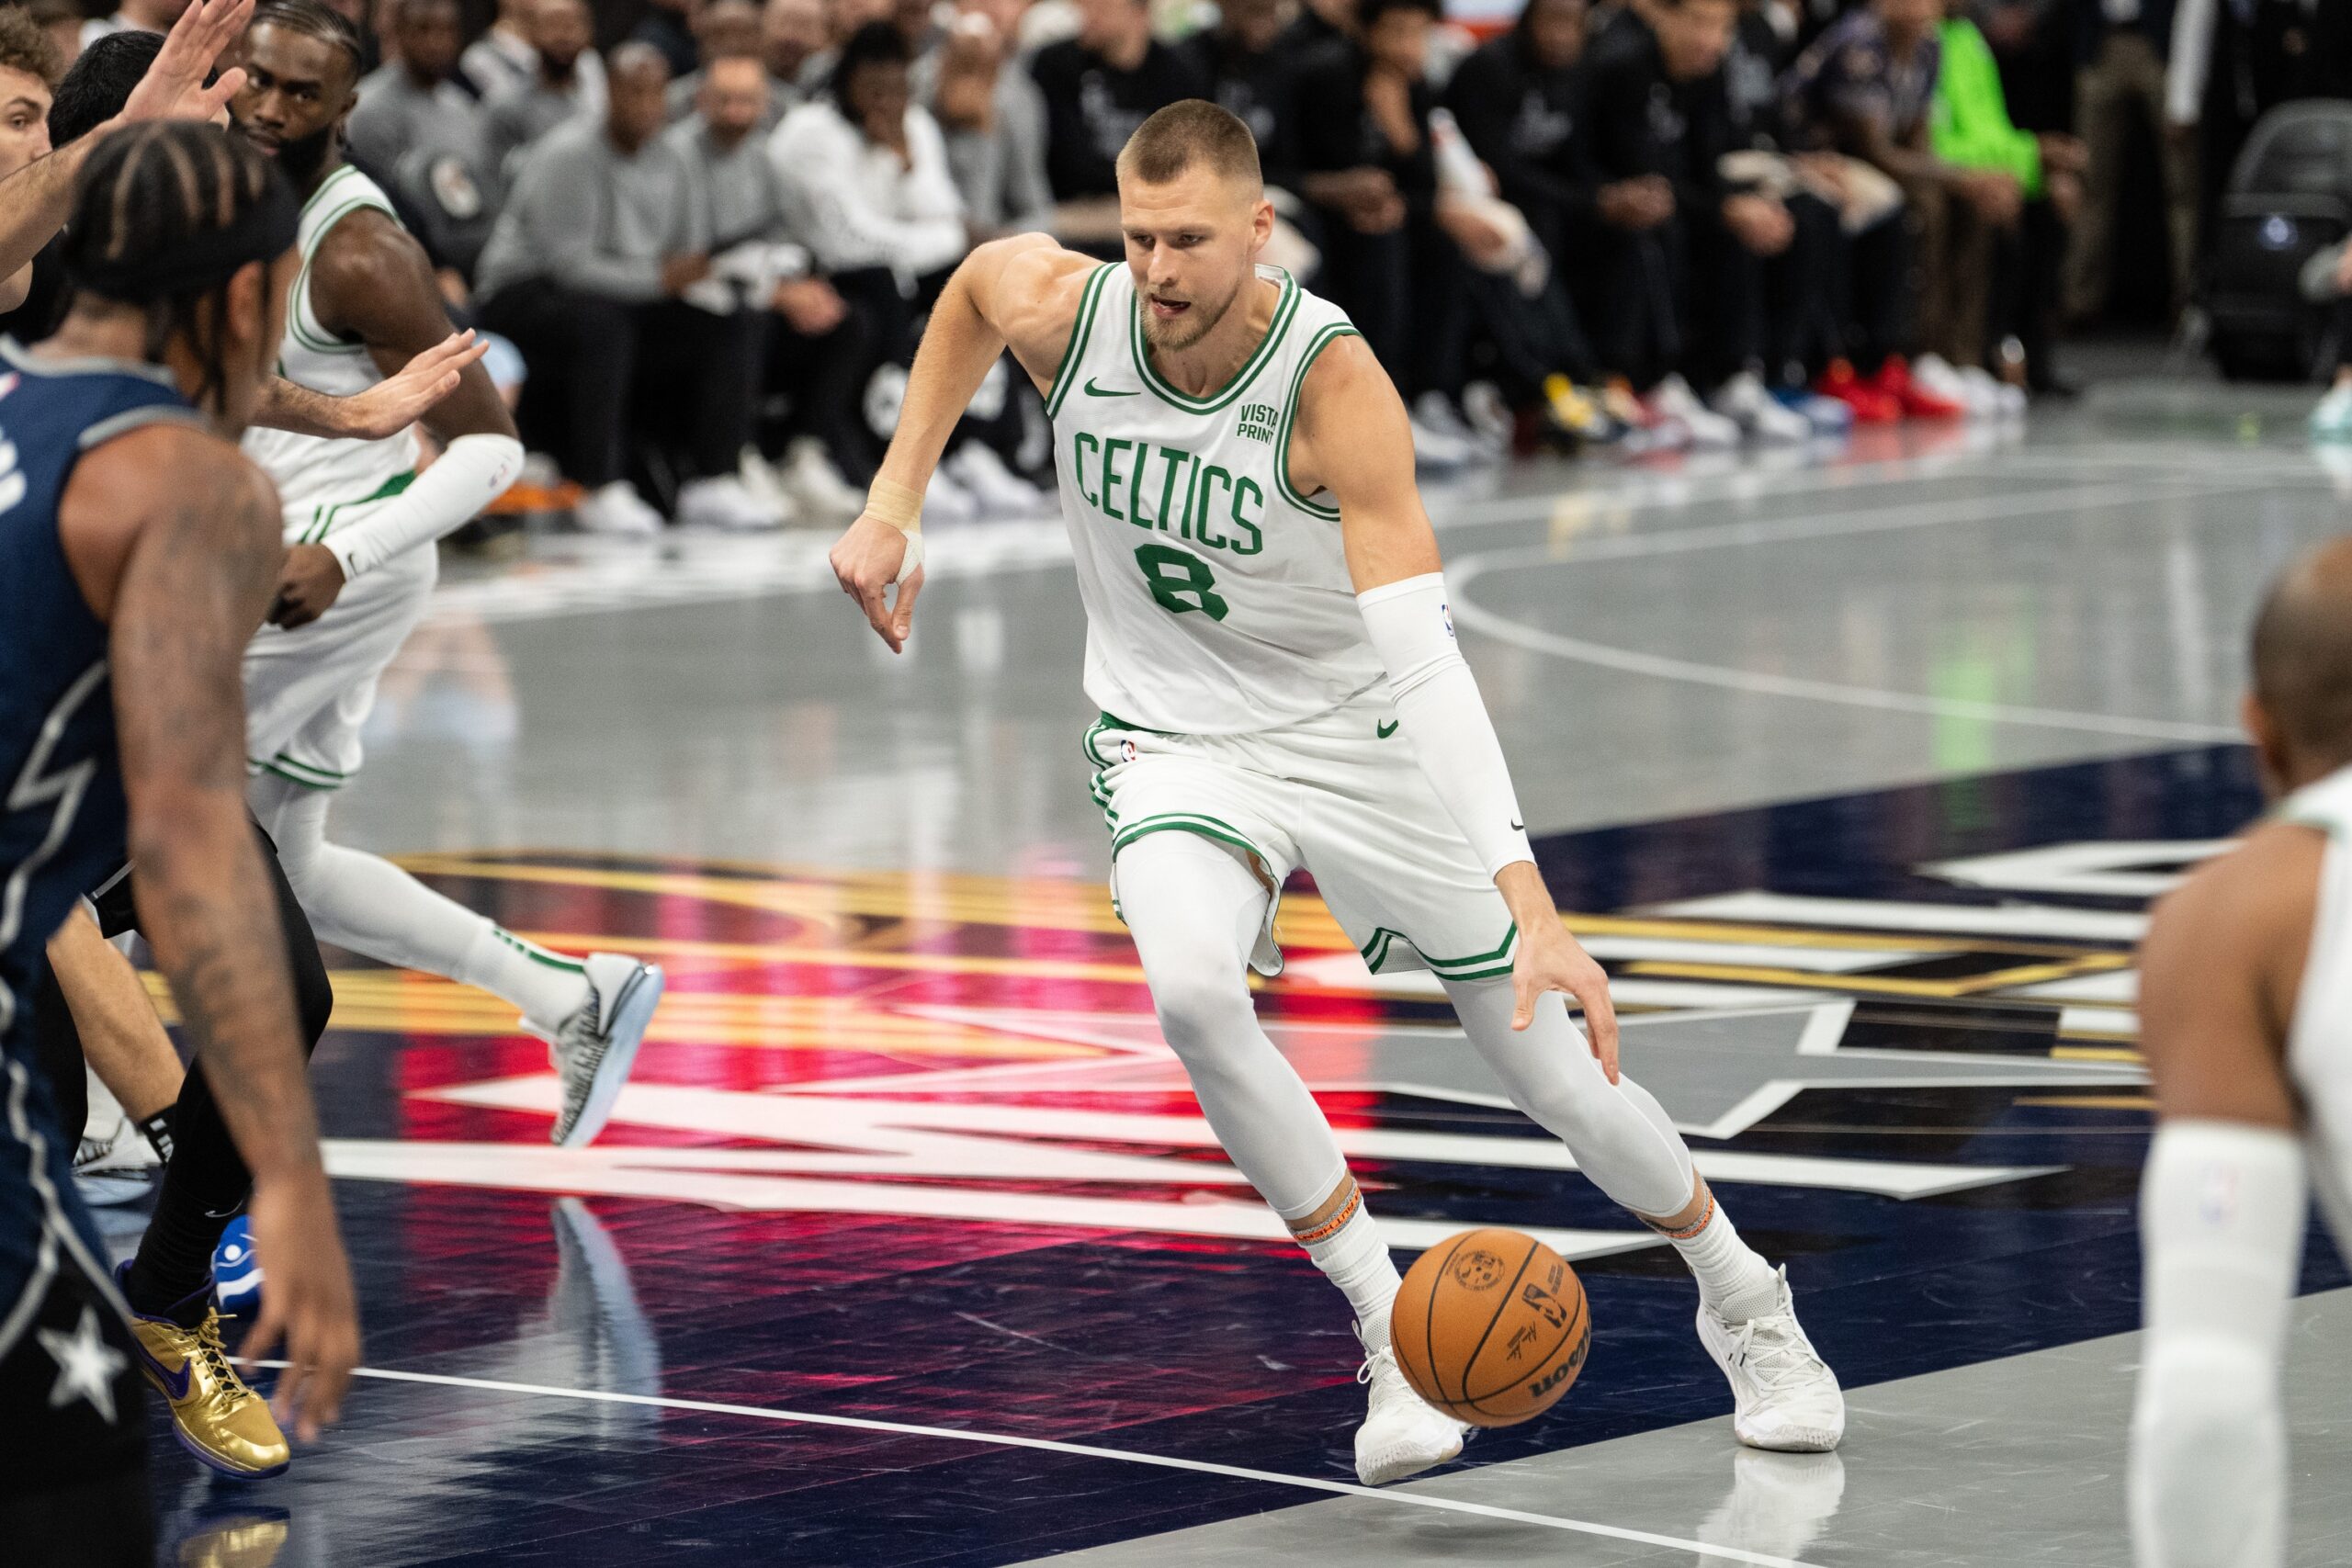 Boston Celtics forward Kristaps Porzingis (8) dribbles the ball against the Orlando Magic in the first quarter at Amway Center.